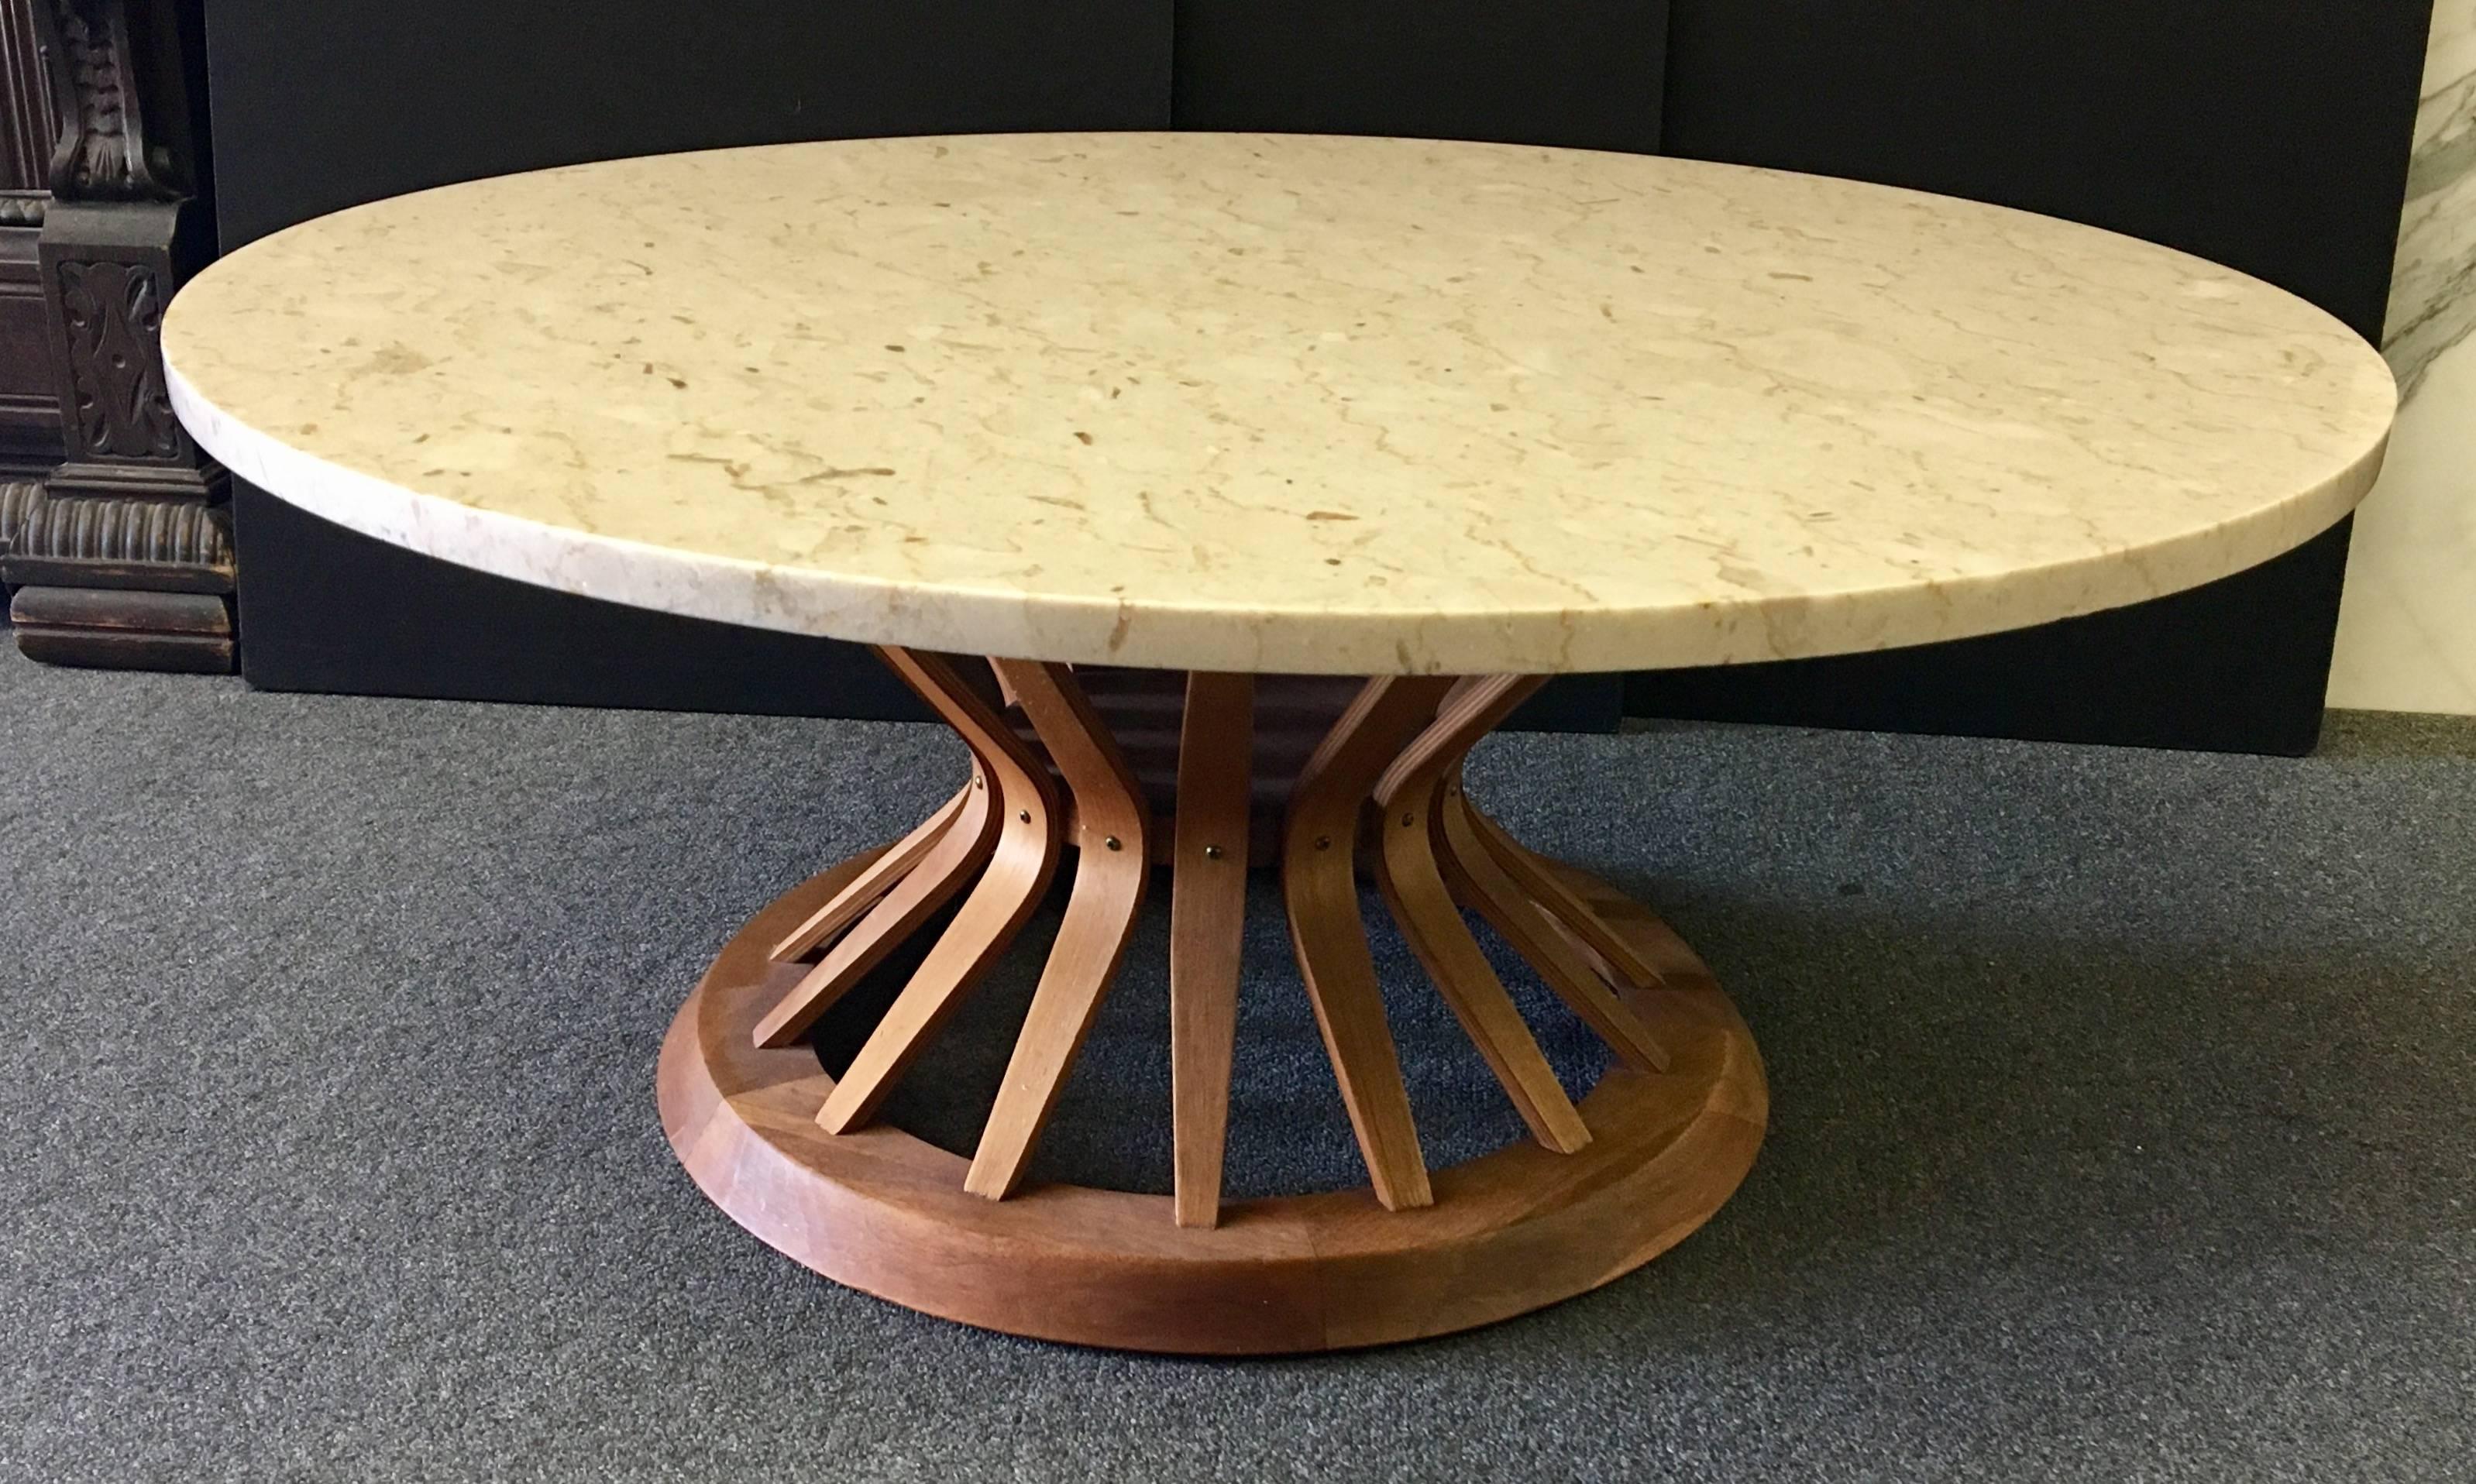 Beautiful round wheat shaft coffee table designed by Edward Wormley for Dunbar, circa 1960s. Solid walnut base with nice 1" thick Italian marble top. Excellent condition; solid and sturdy. The marble top diameter is 36". The piece can be